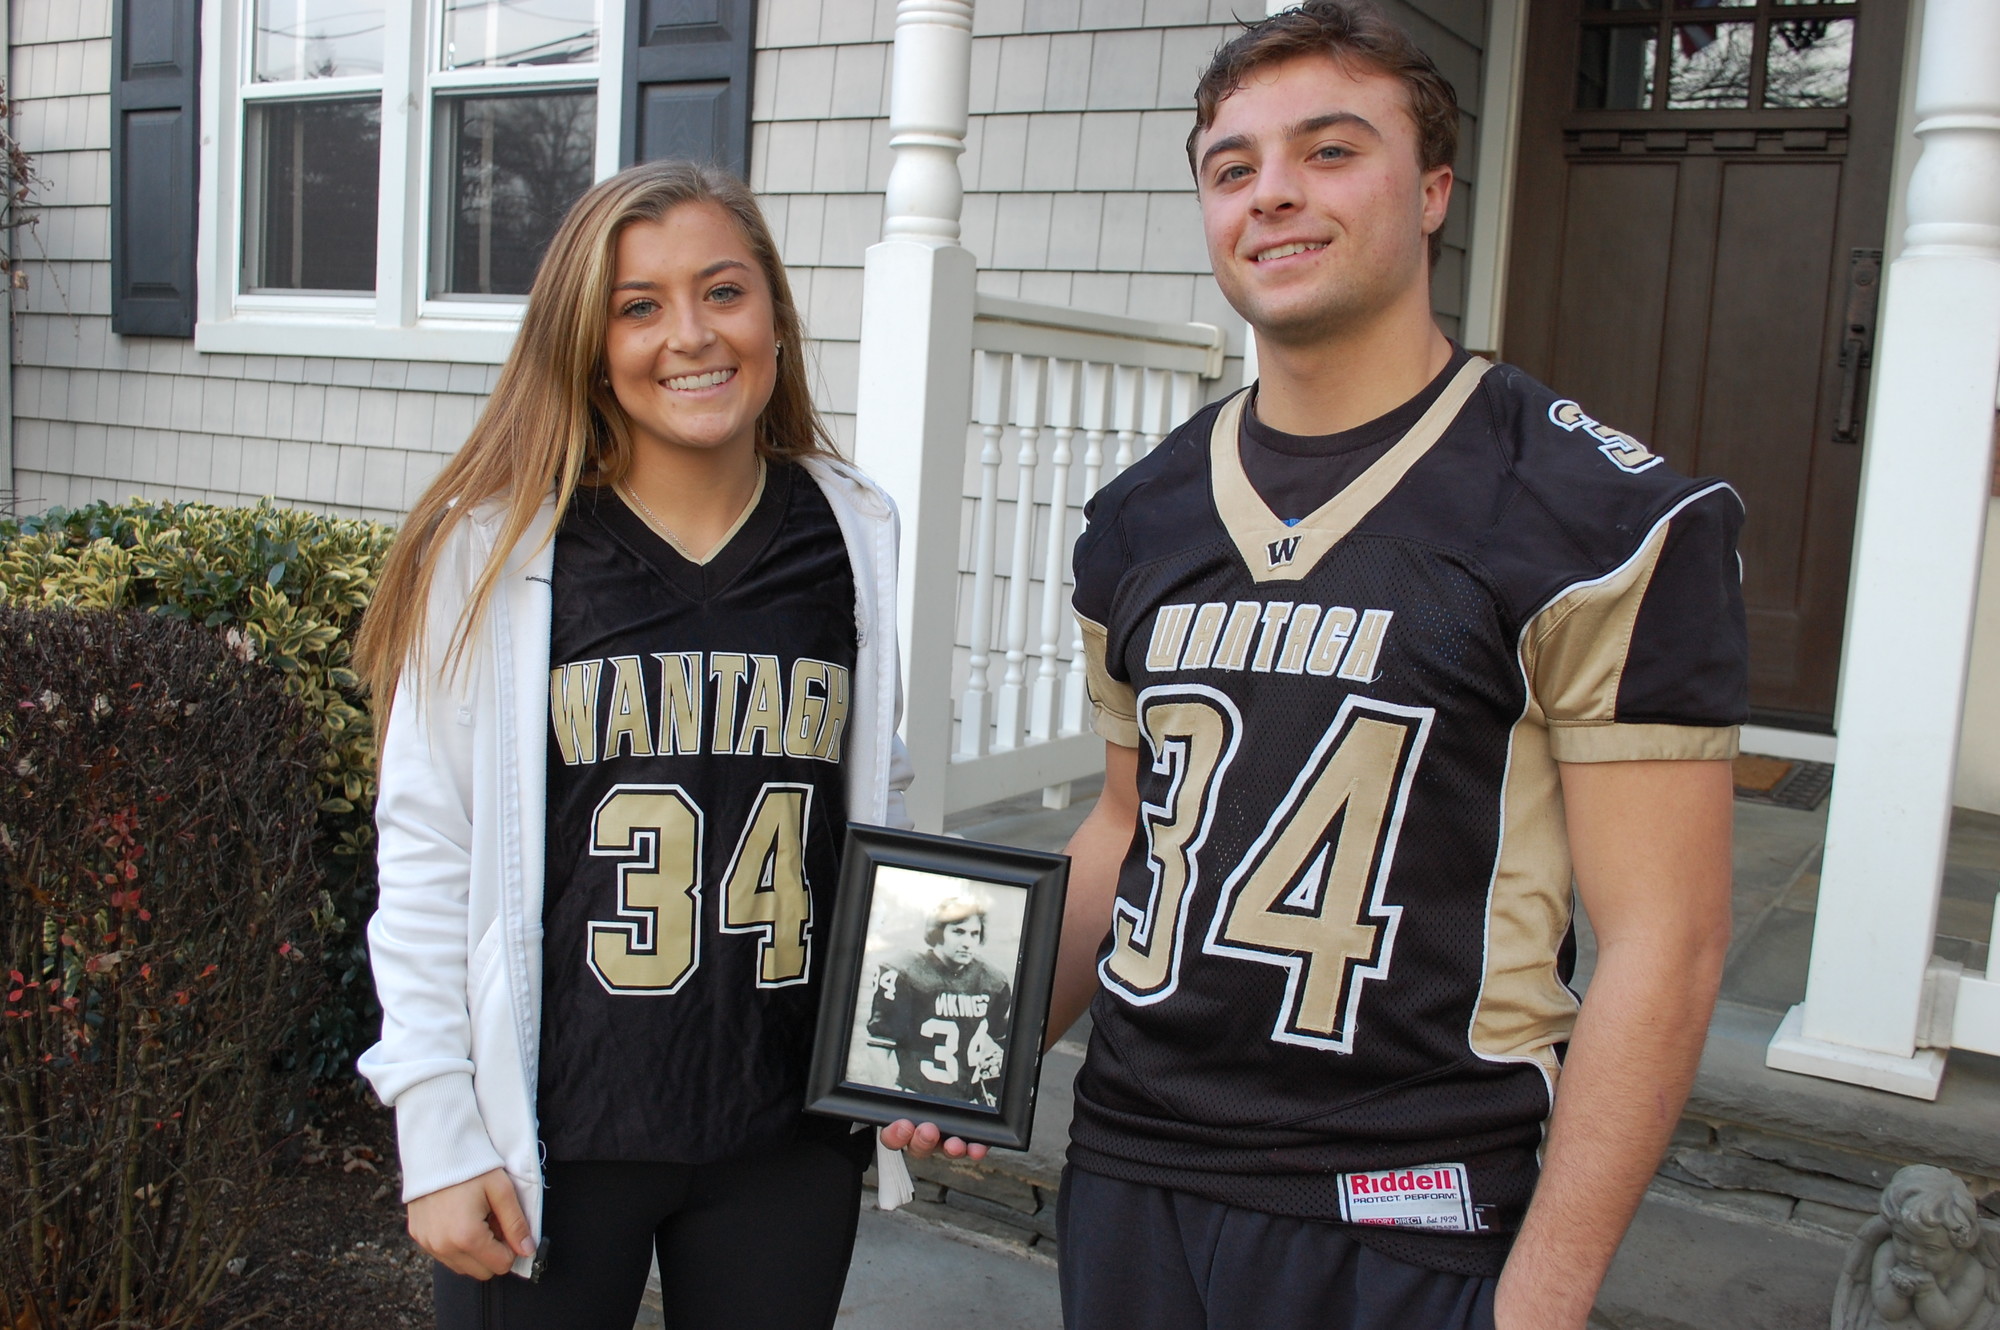 Nikki and Kyle Sliwak, with their choice of uniform number for the Wantagh Warriors, honor their father, Robert, who played football and baseball for the Seaford Vikings, and died on Sept. 11.